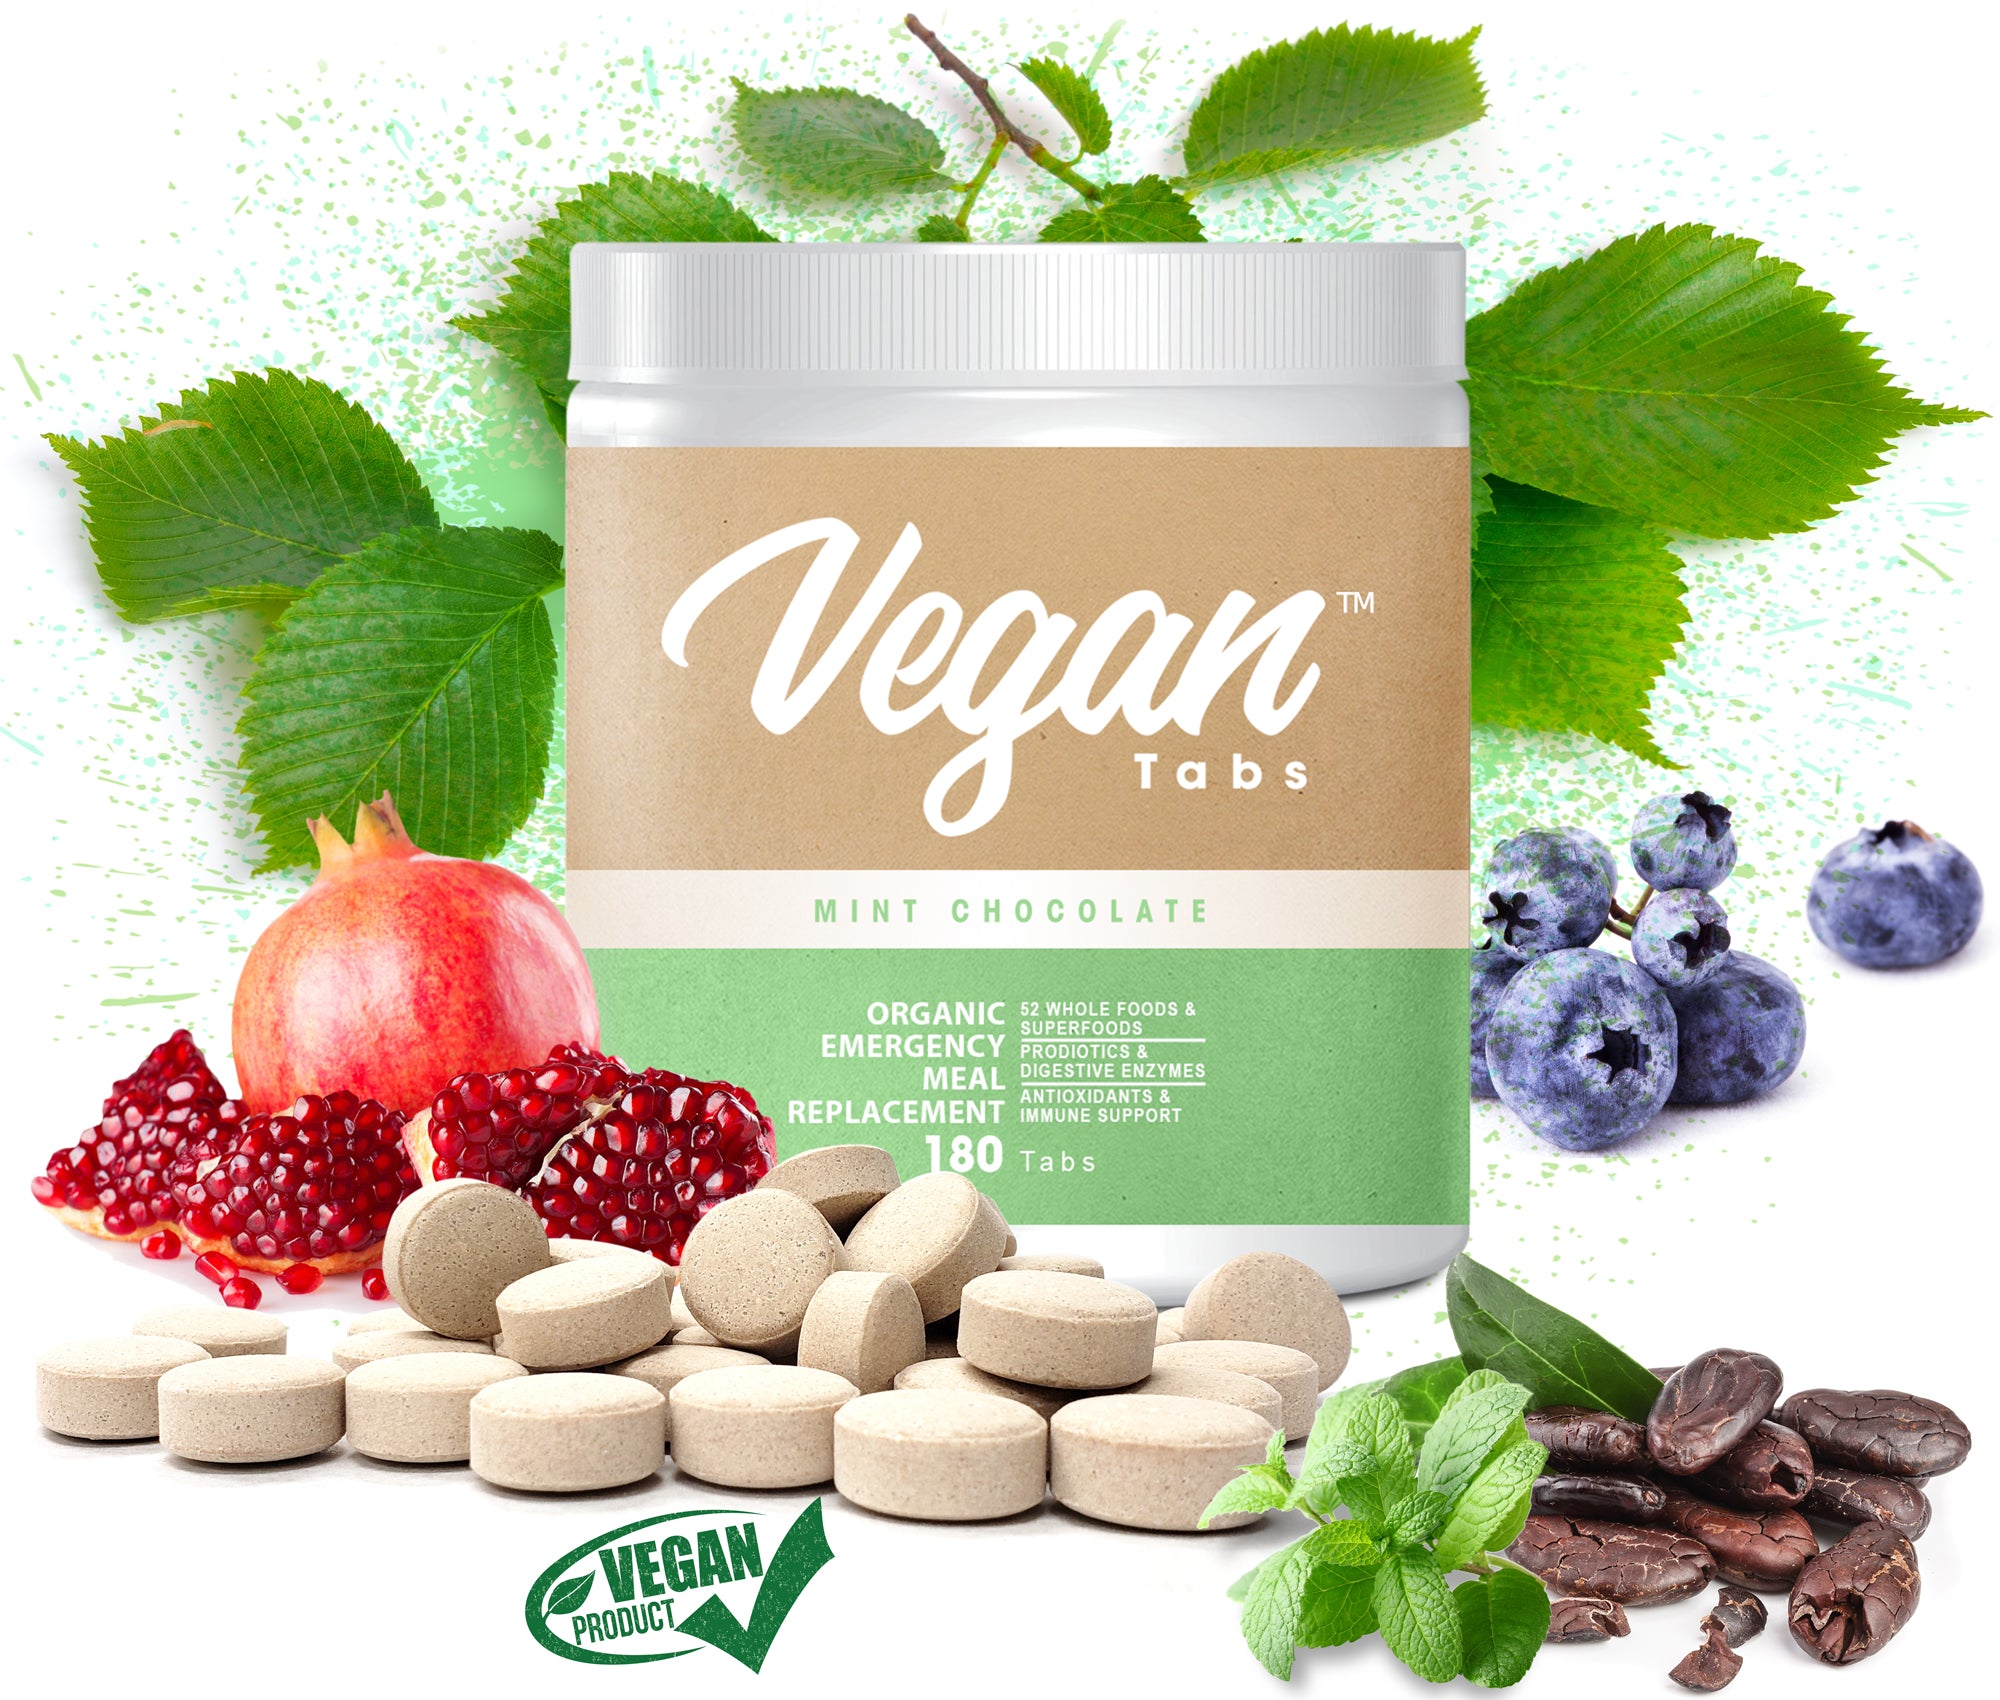 180 Organic Protein tablets, 20g of Plant-Based Protein for Women and Men, Probiotic, Vegan Friendly, Non-GMO, Gluten-Free, Dairy-Free, Soy Free, Mint Chocolate